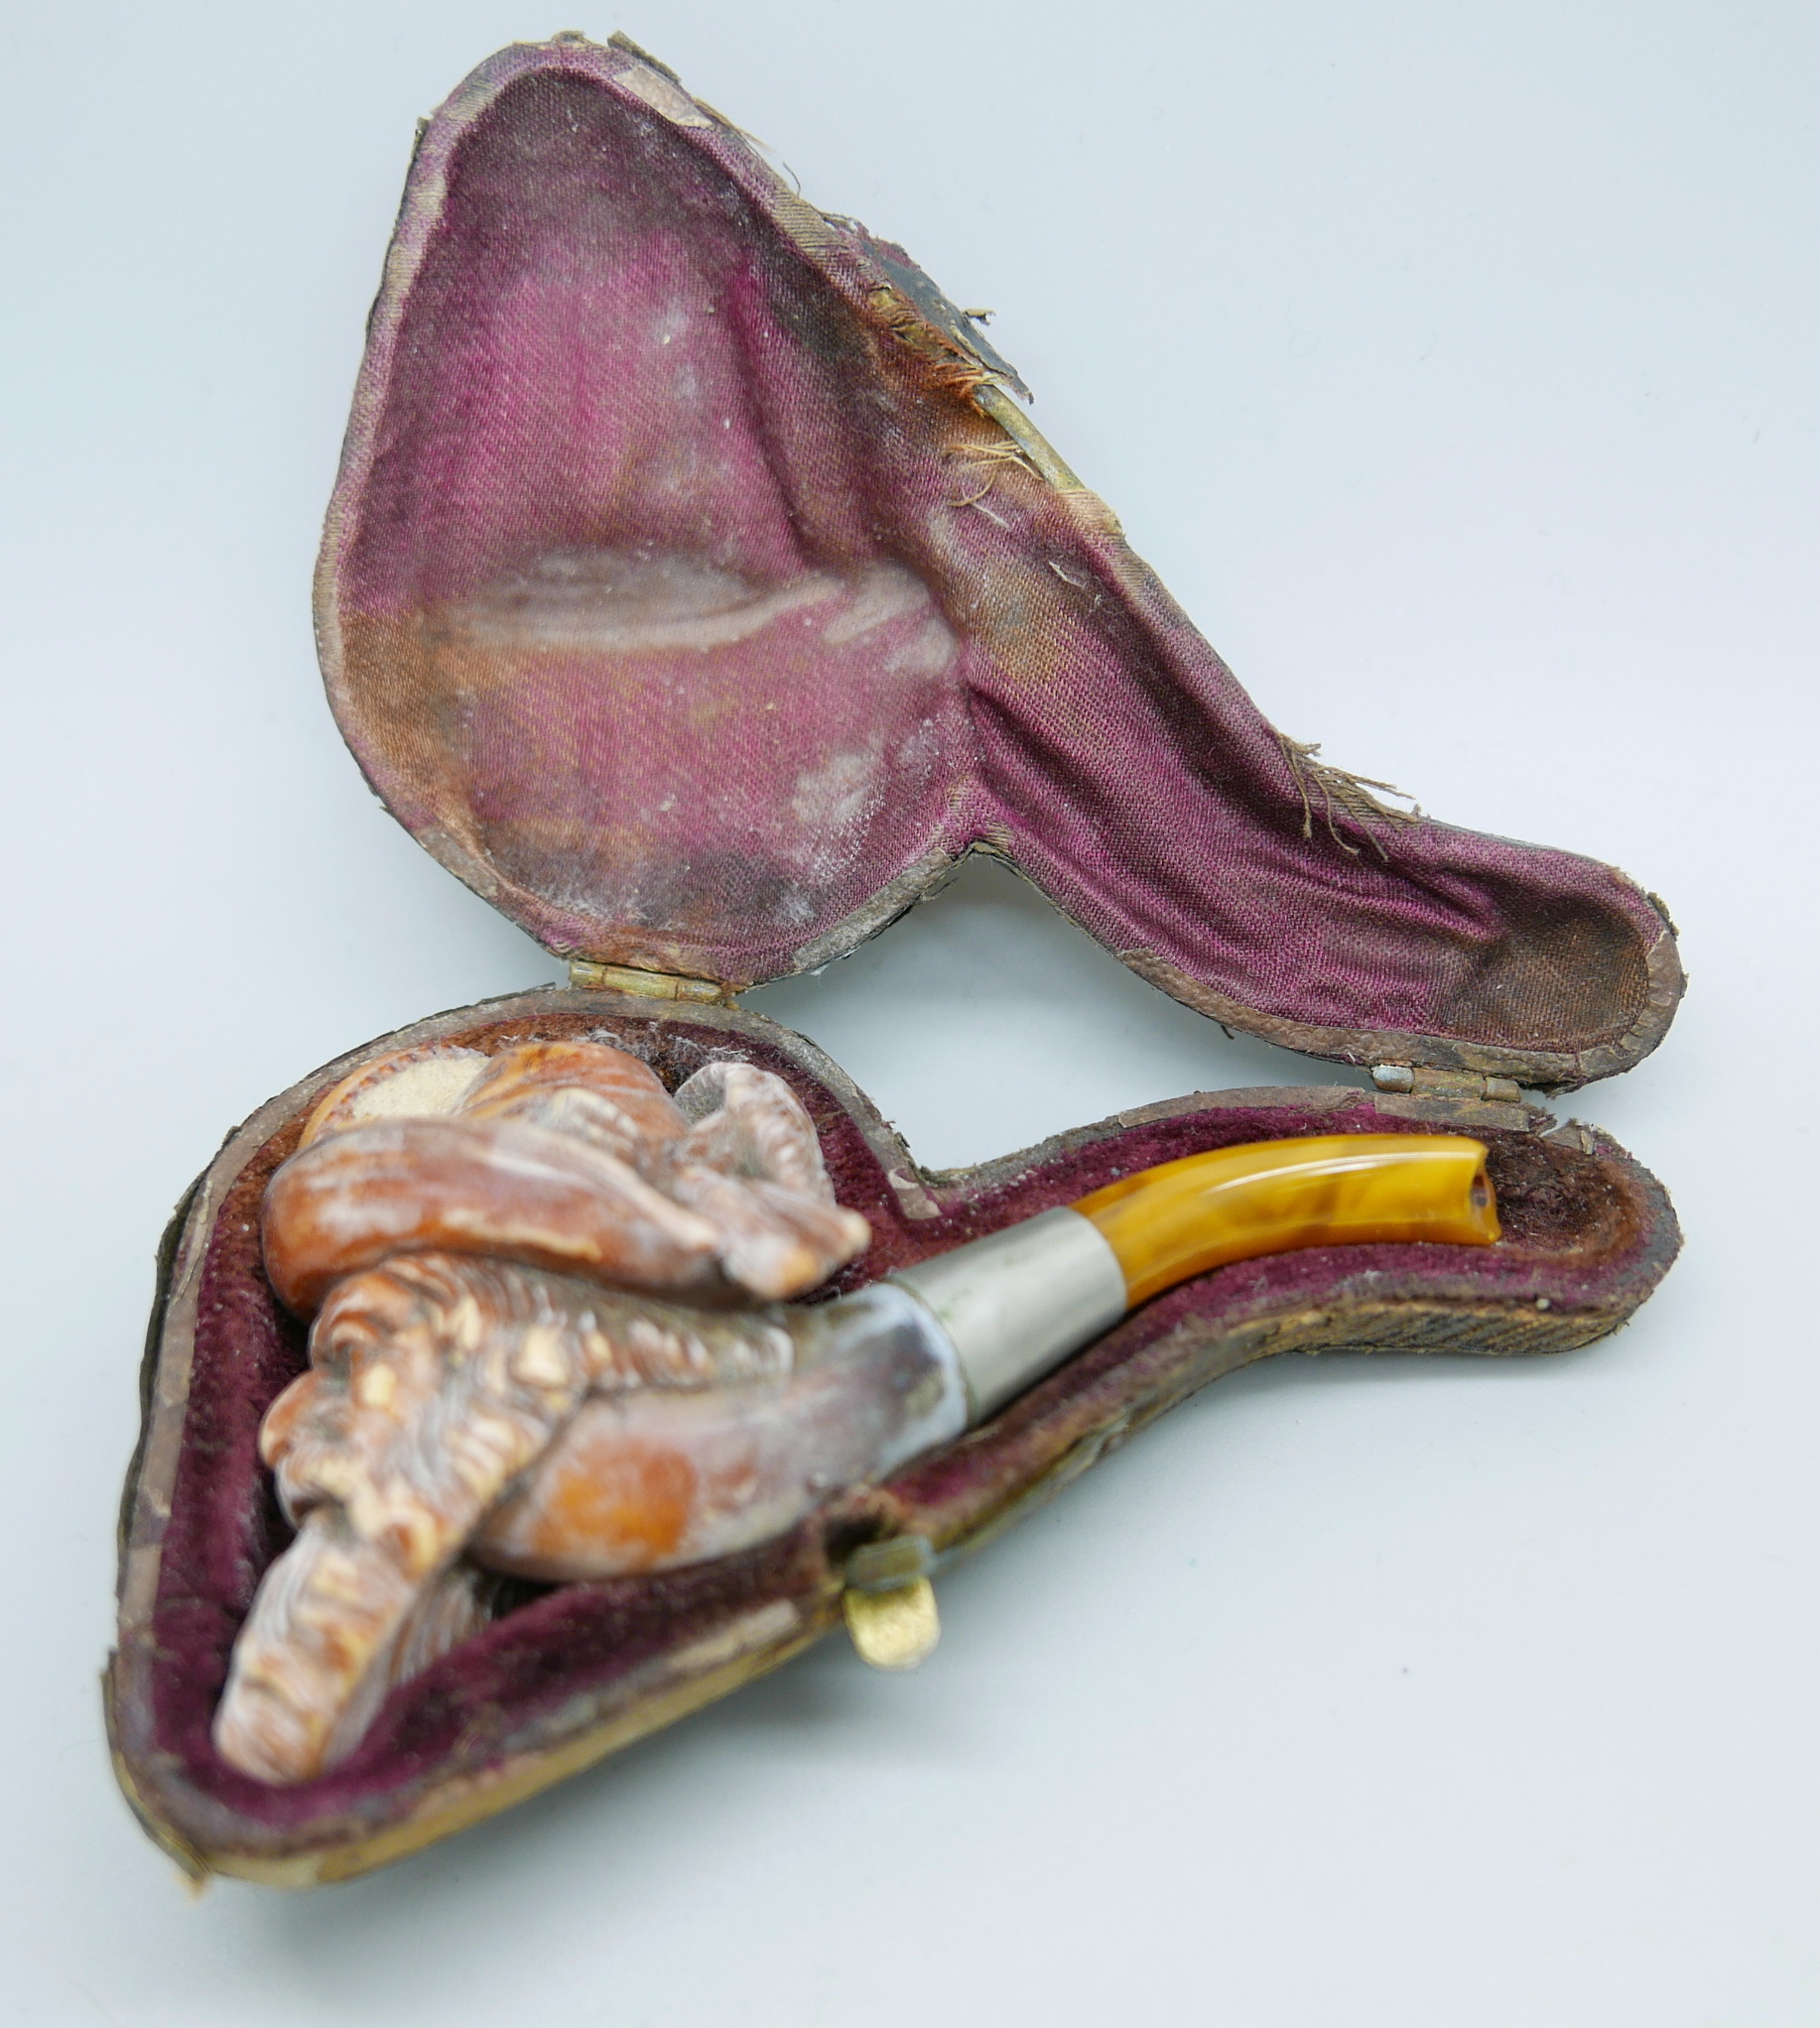 A 19th Century Meerschaum pipe with amber stem, Bavarian man with beard and hat with feather - Image 4 of 5